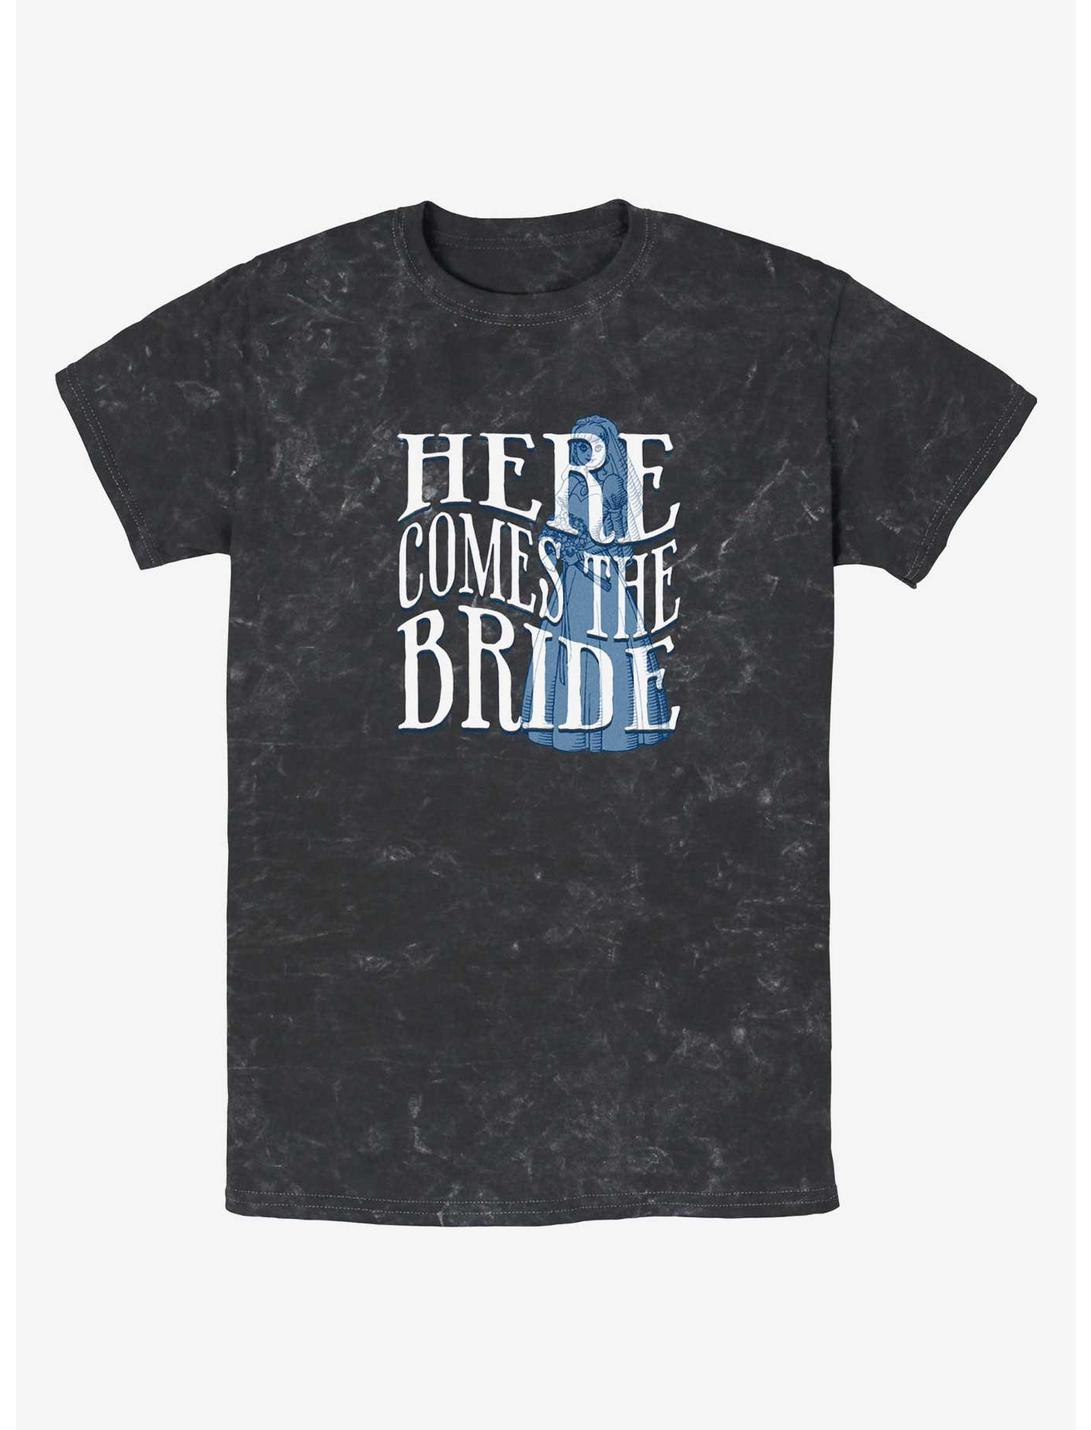 Disney Haunted Mansion Here Comes The Ghost Bride Mineral Wash T-Shirt, BLACK, hi-res